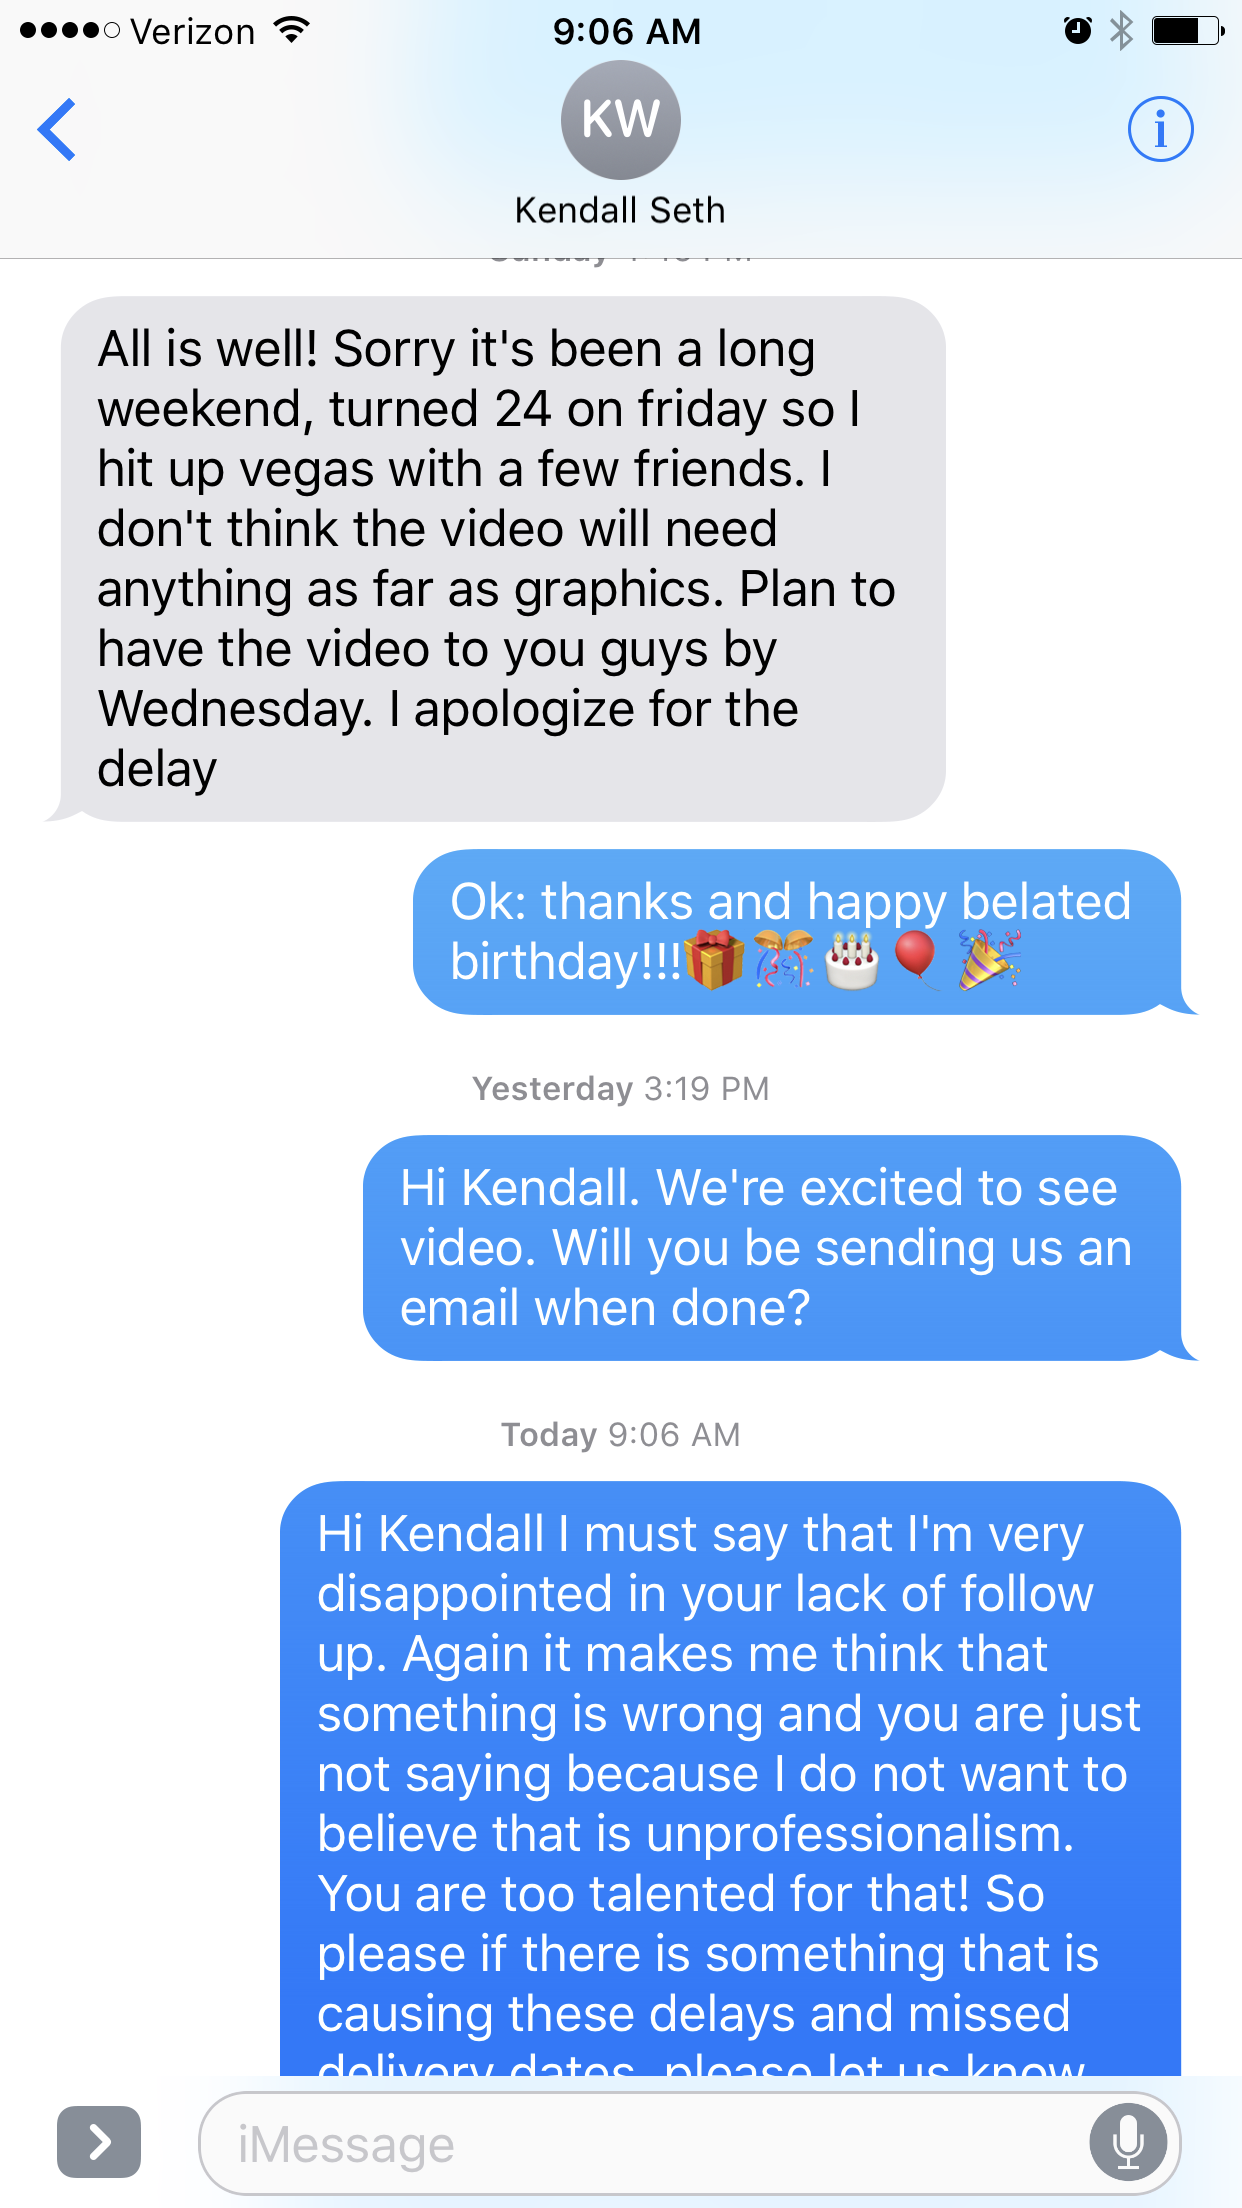 Follow Up Text After Second Missed Delivery Date